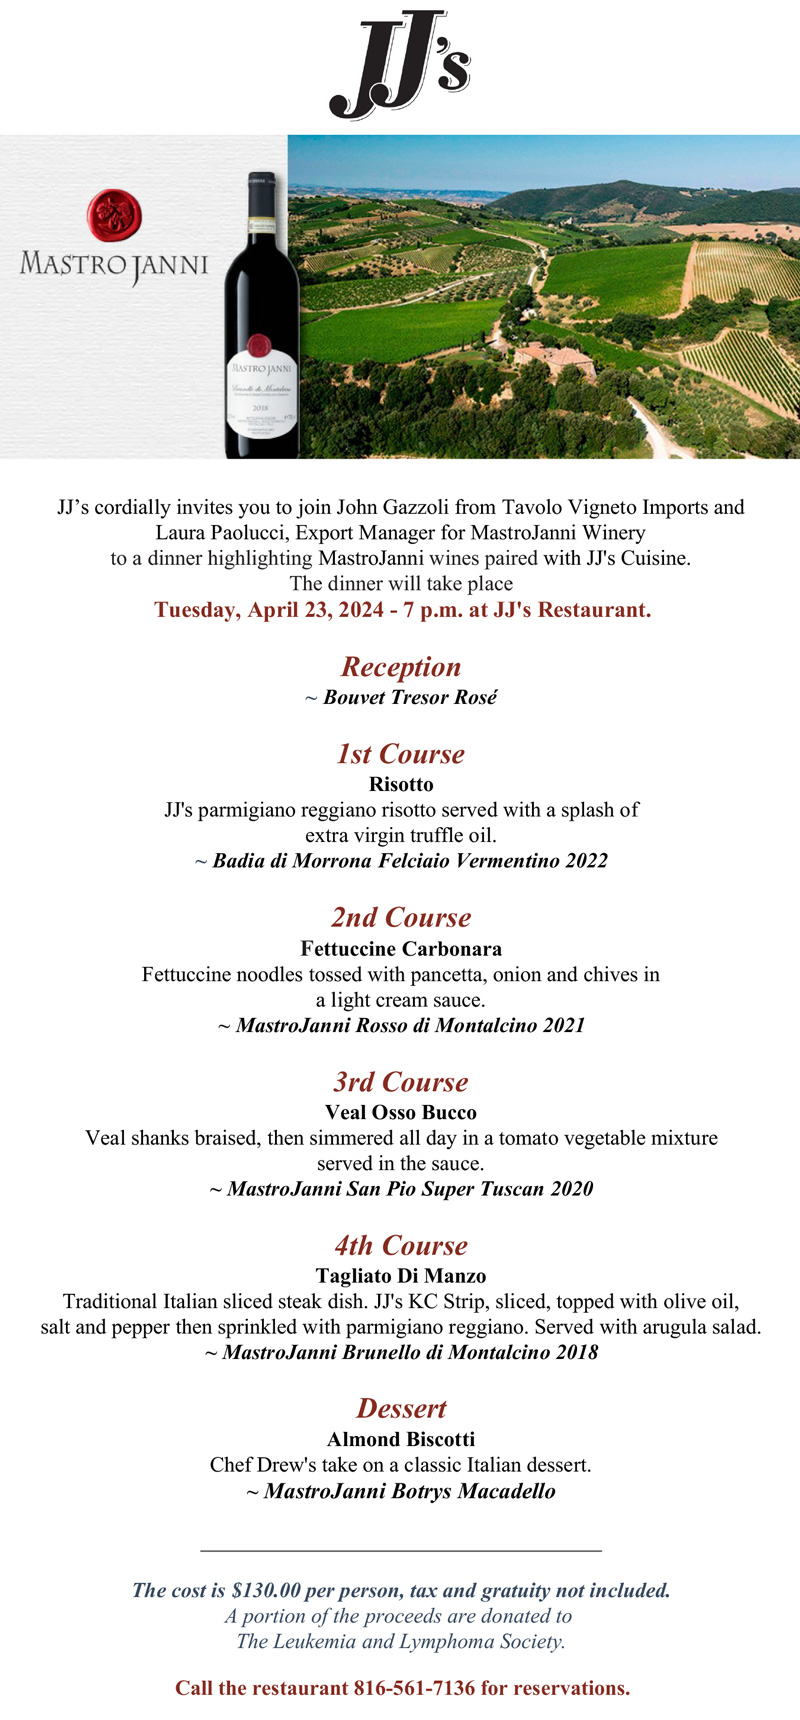 Join us for the MastroJanni Wine Dinner and Tasting. Tuesday, April 23 at 7 p.m. Call 913-561-7136 for reservations today.